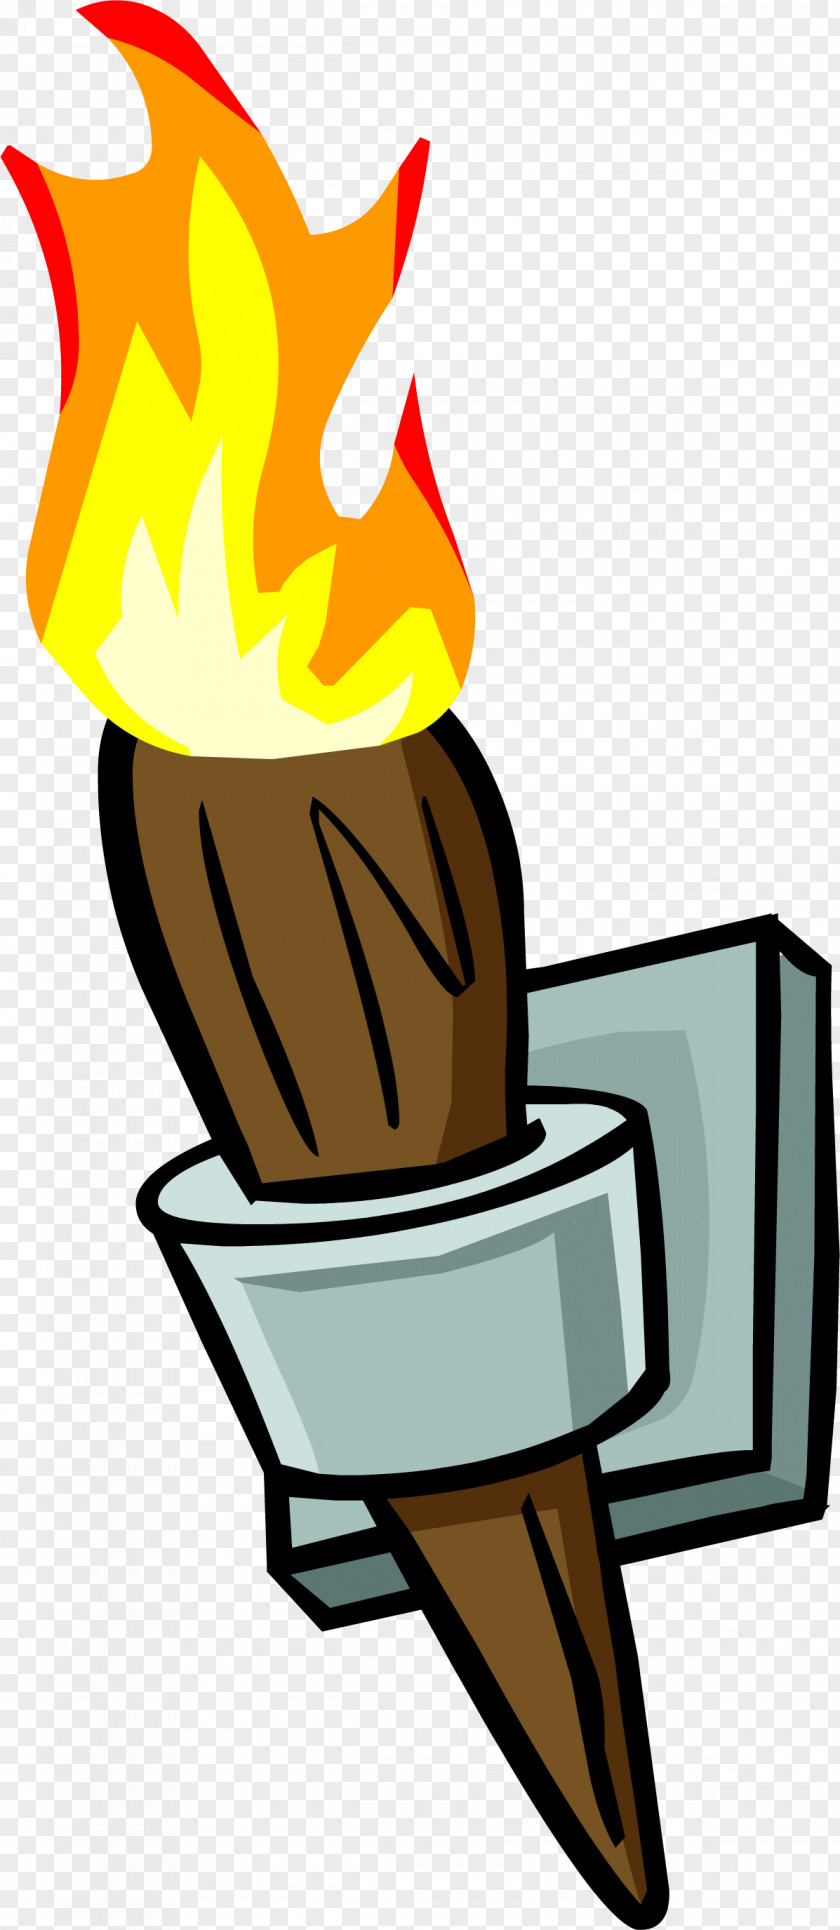 Scholar Torch Clip Art Wall Image PNG